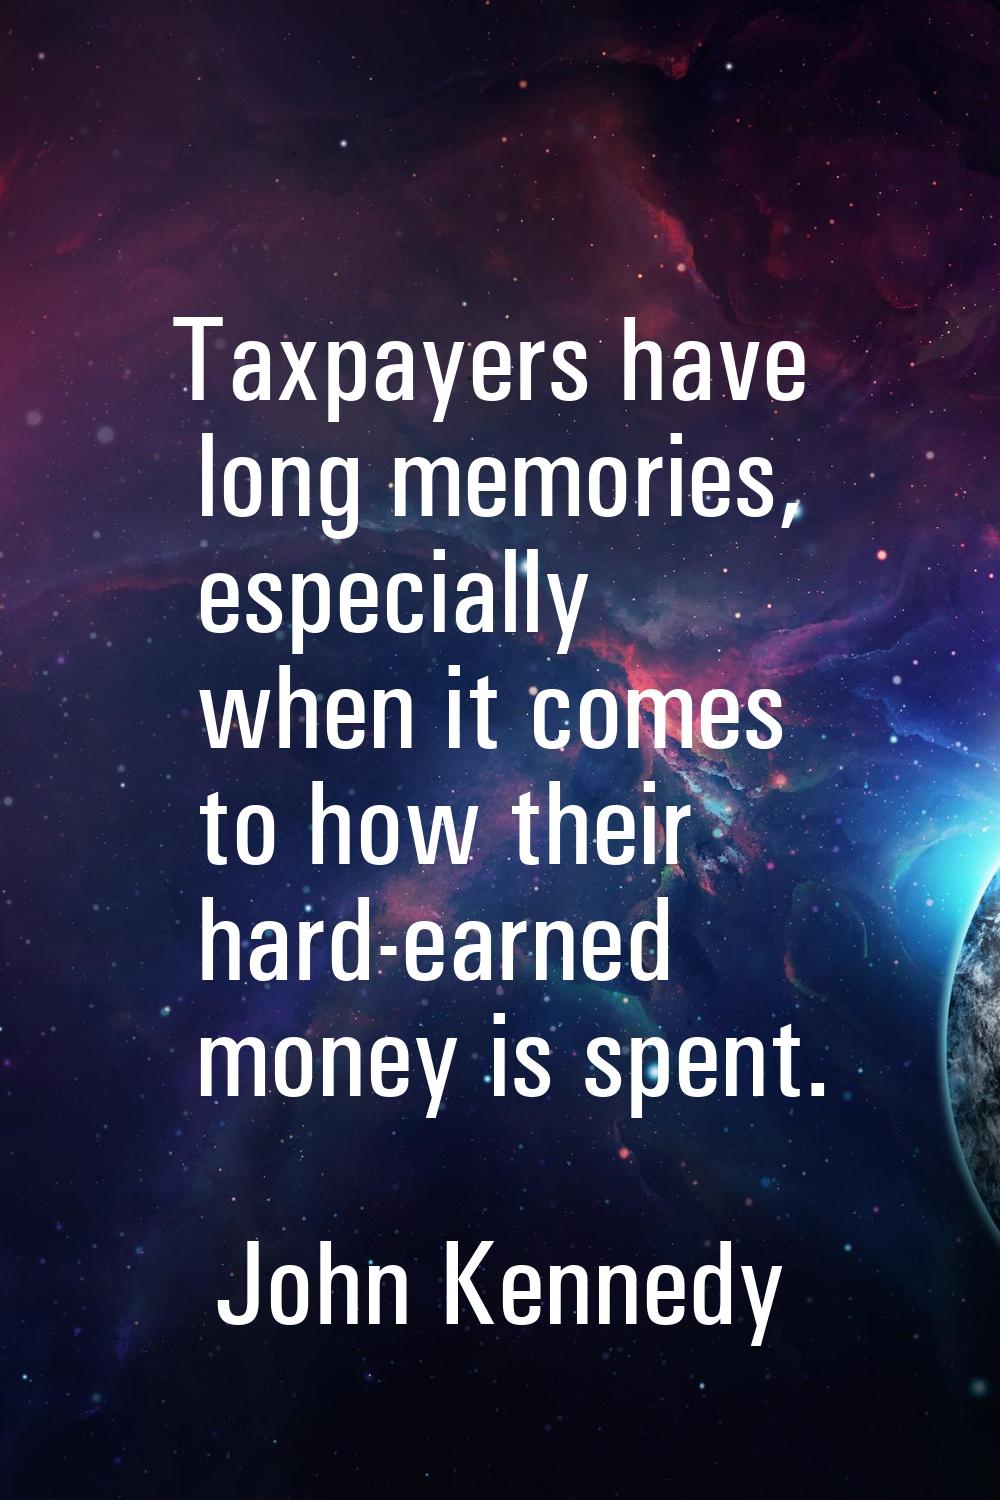 Taxpayers have long memories, especially when it comes to how their hard-earned money is spent.